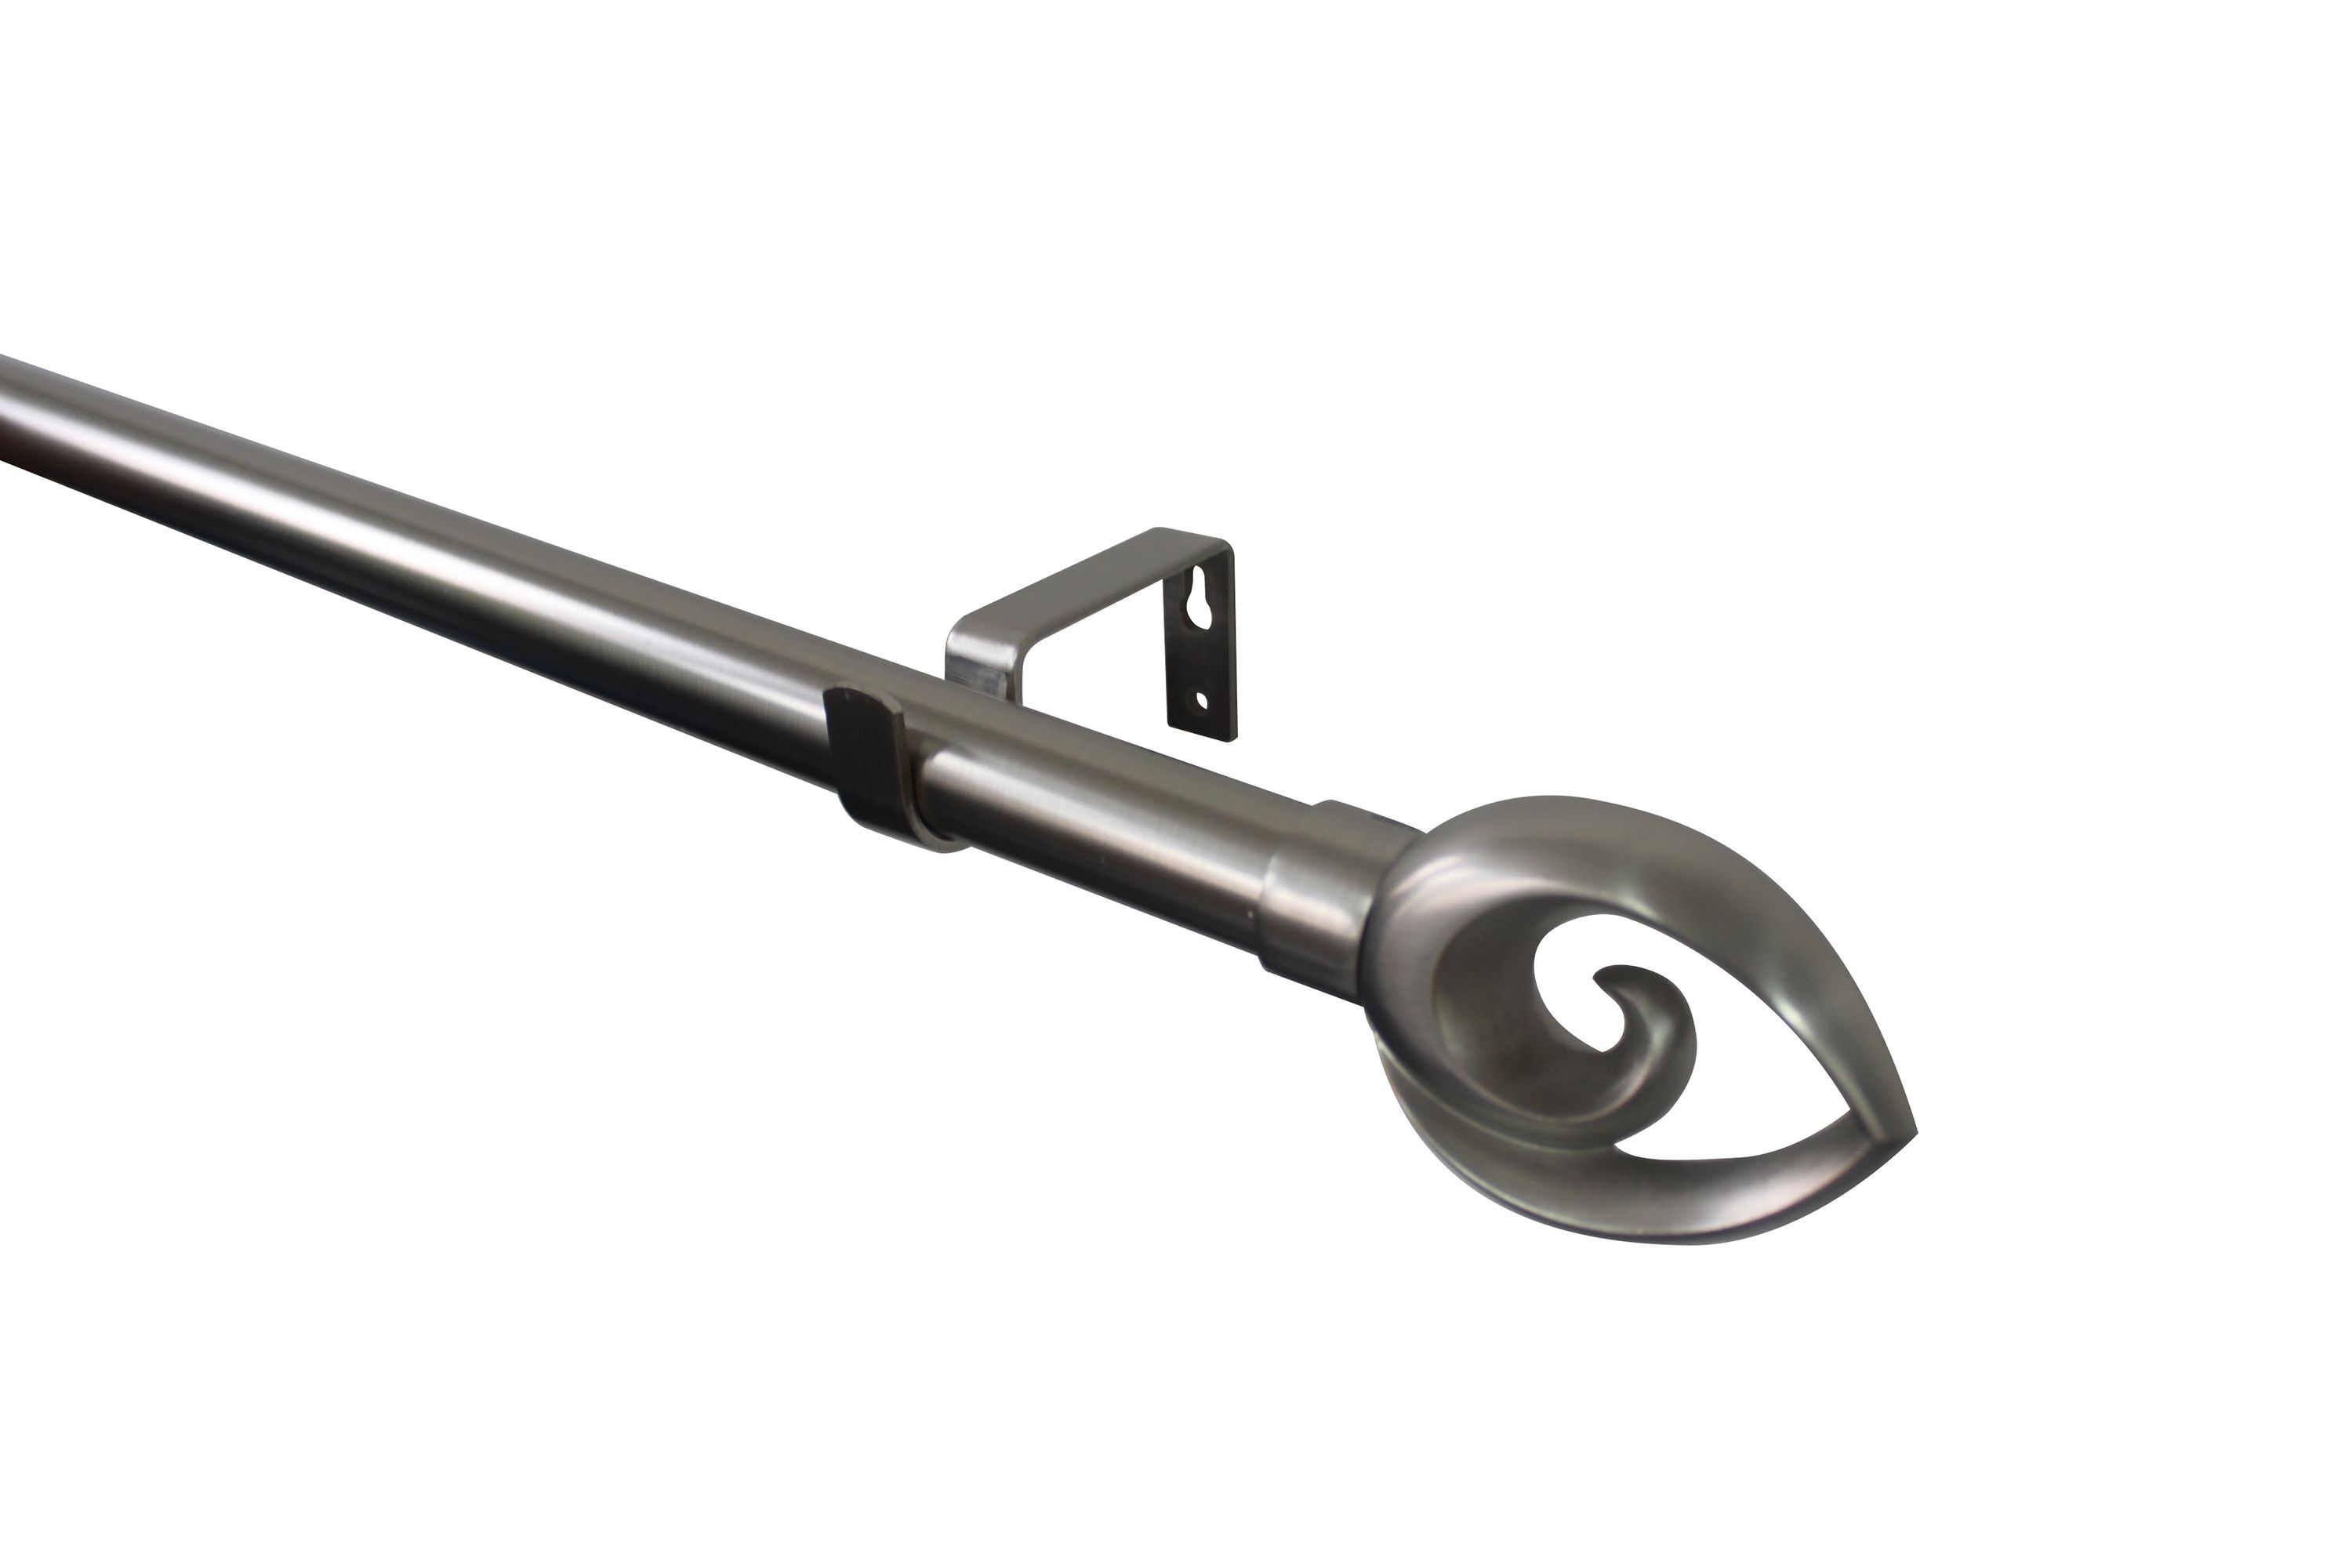 GoodHome Athens Grey Brushed nickel effect Extendable Swirl Curtain pole Set, (L)1200mm-2100mm (Dia)28mm